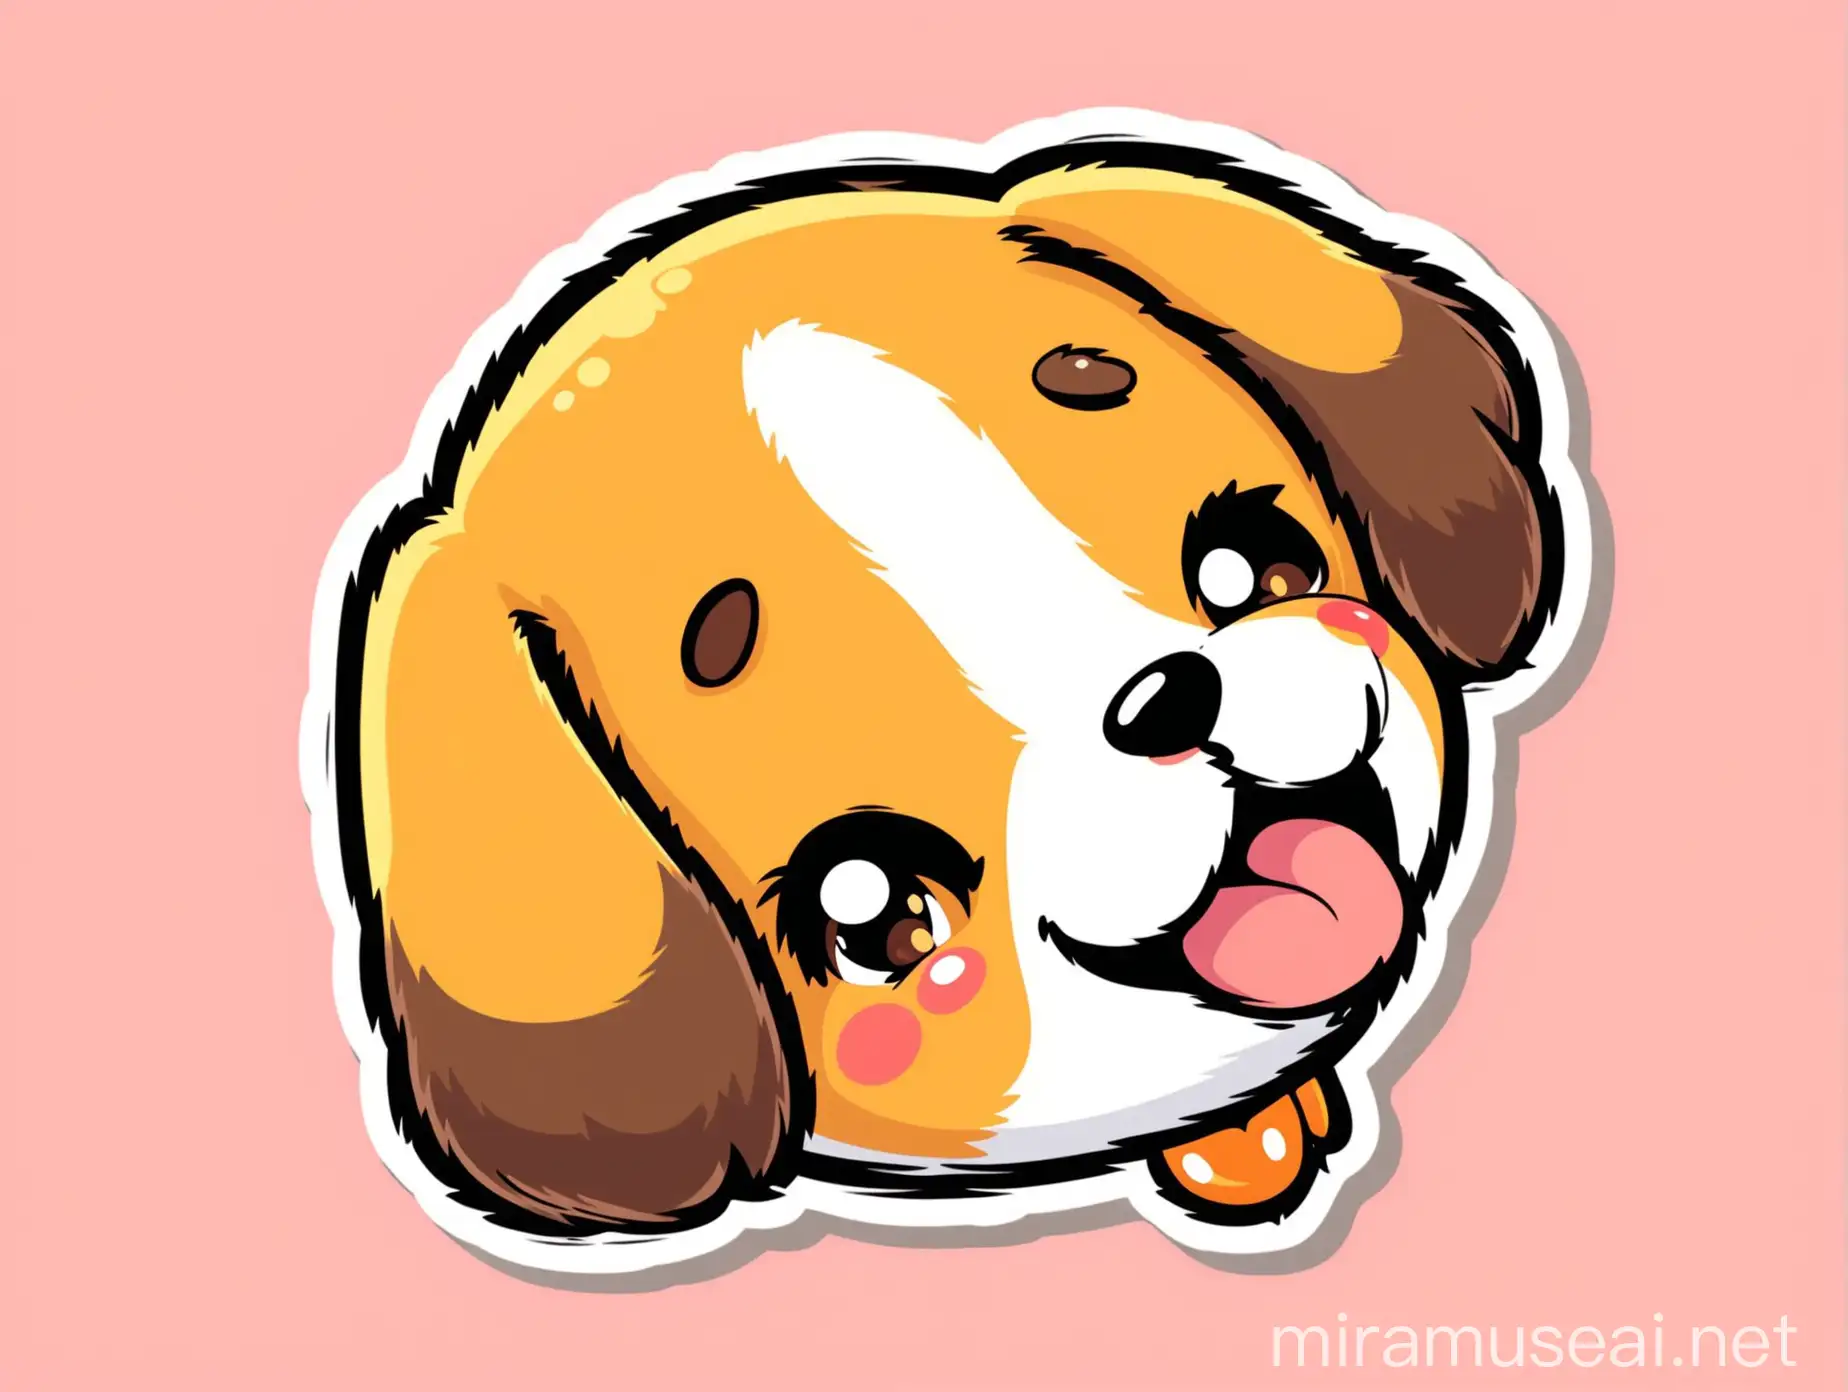 Cheerful Cartoon Dog Sticker in Vibrant Colors